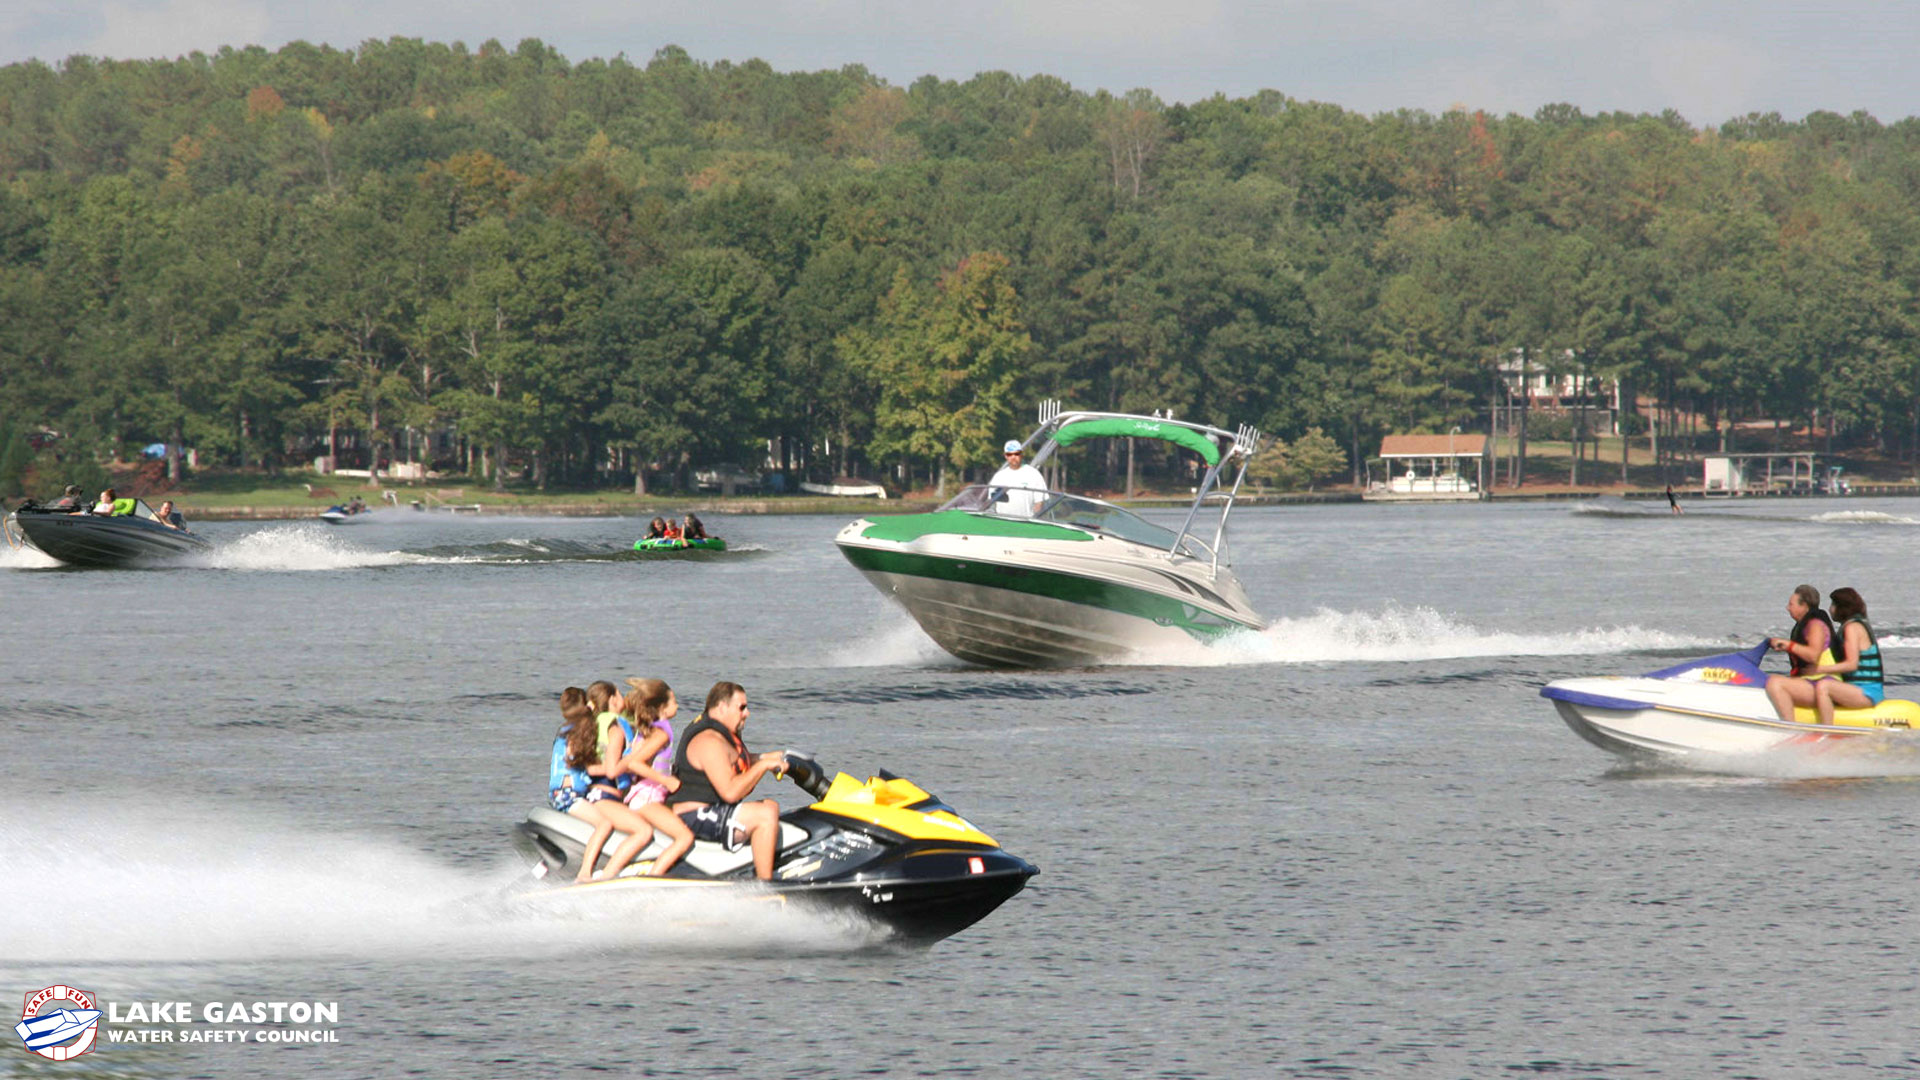 Every year Lake Gaston has multiple boating accidents